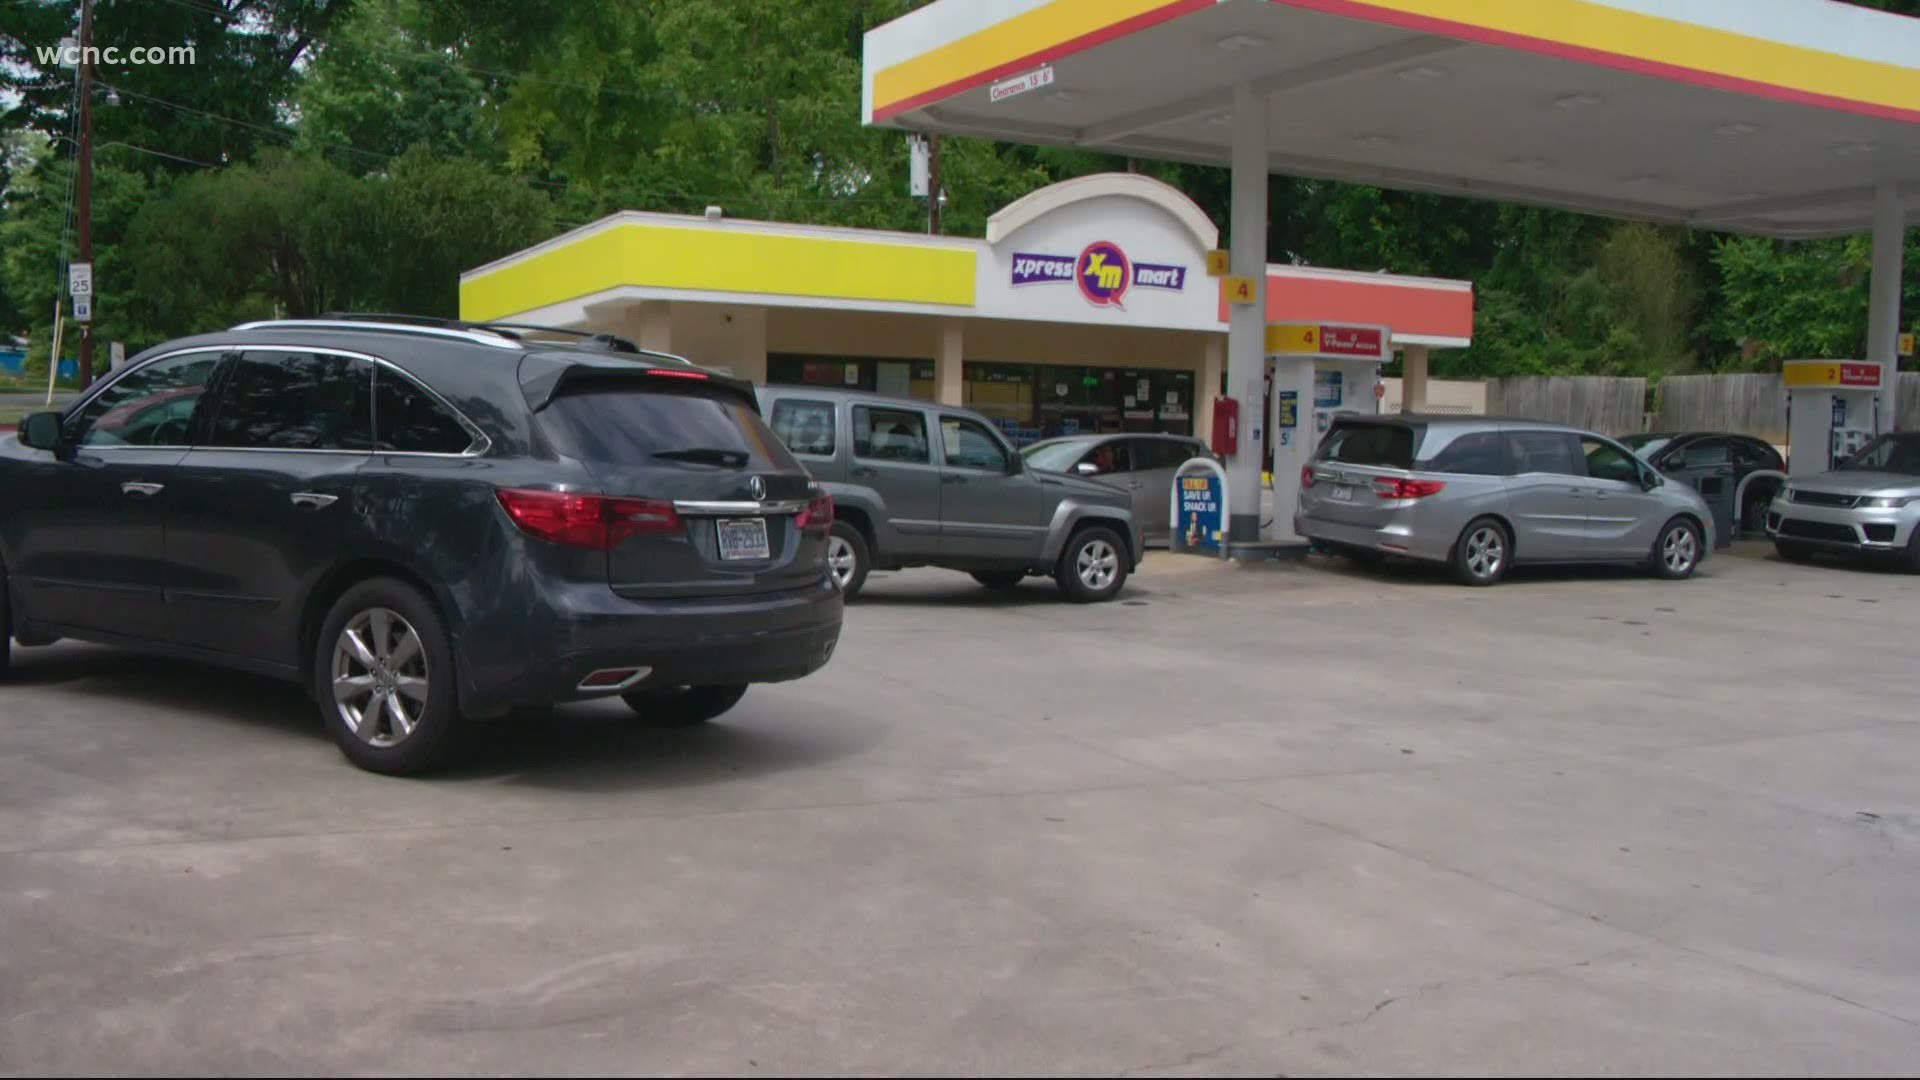 We talked to experts to figure out what has led to the gas shortage.